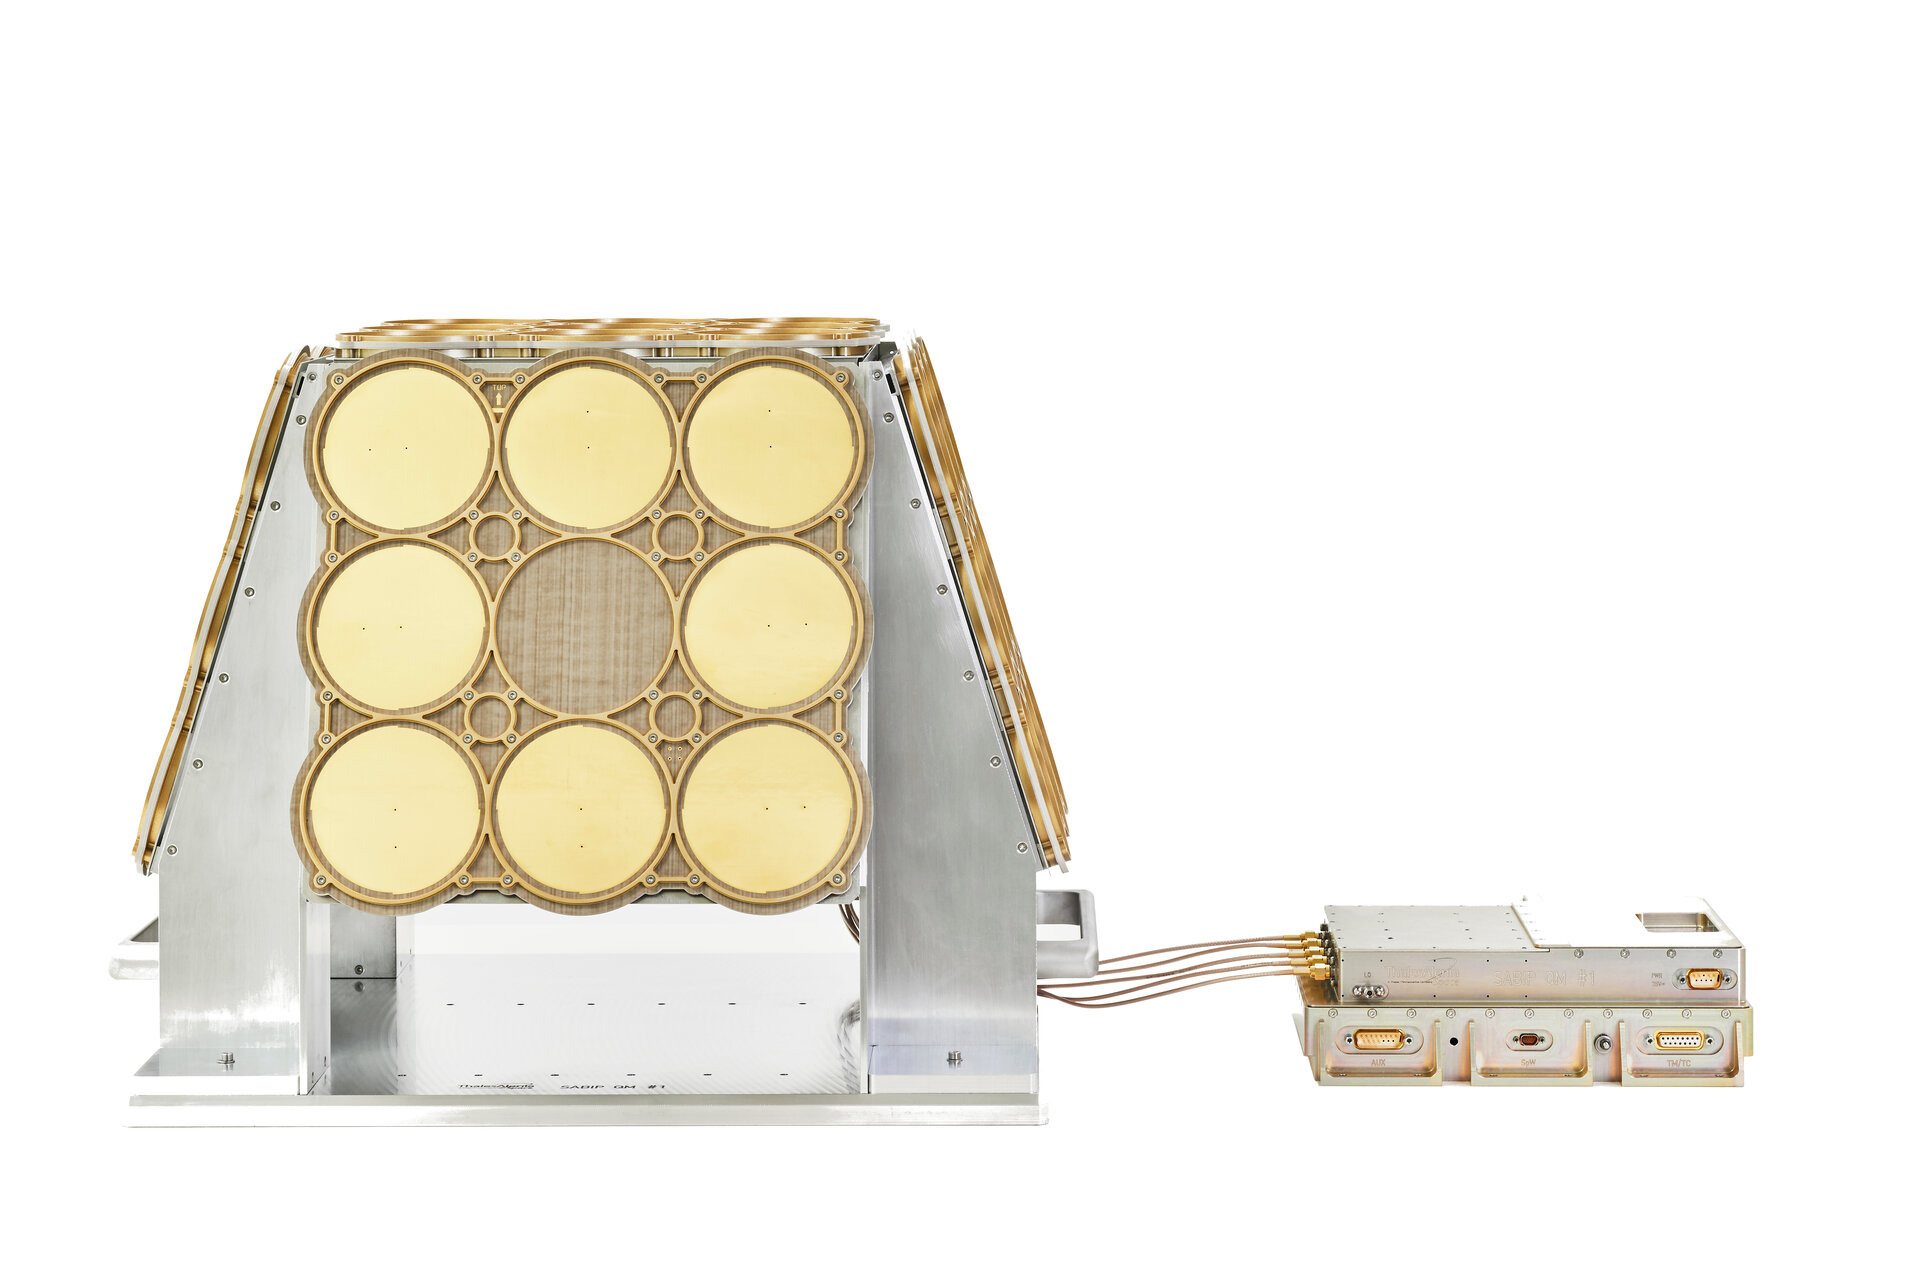 SABIP Payload consisting of antenna and receiver (courtesy of TAS-D)